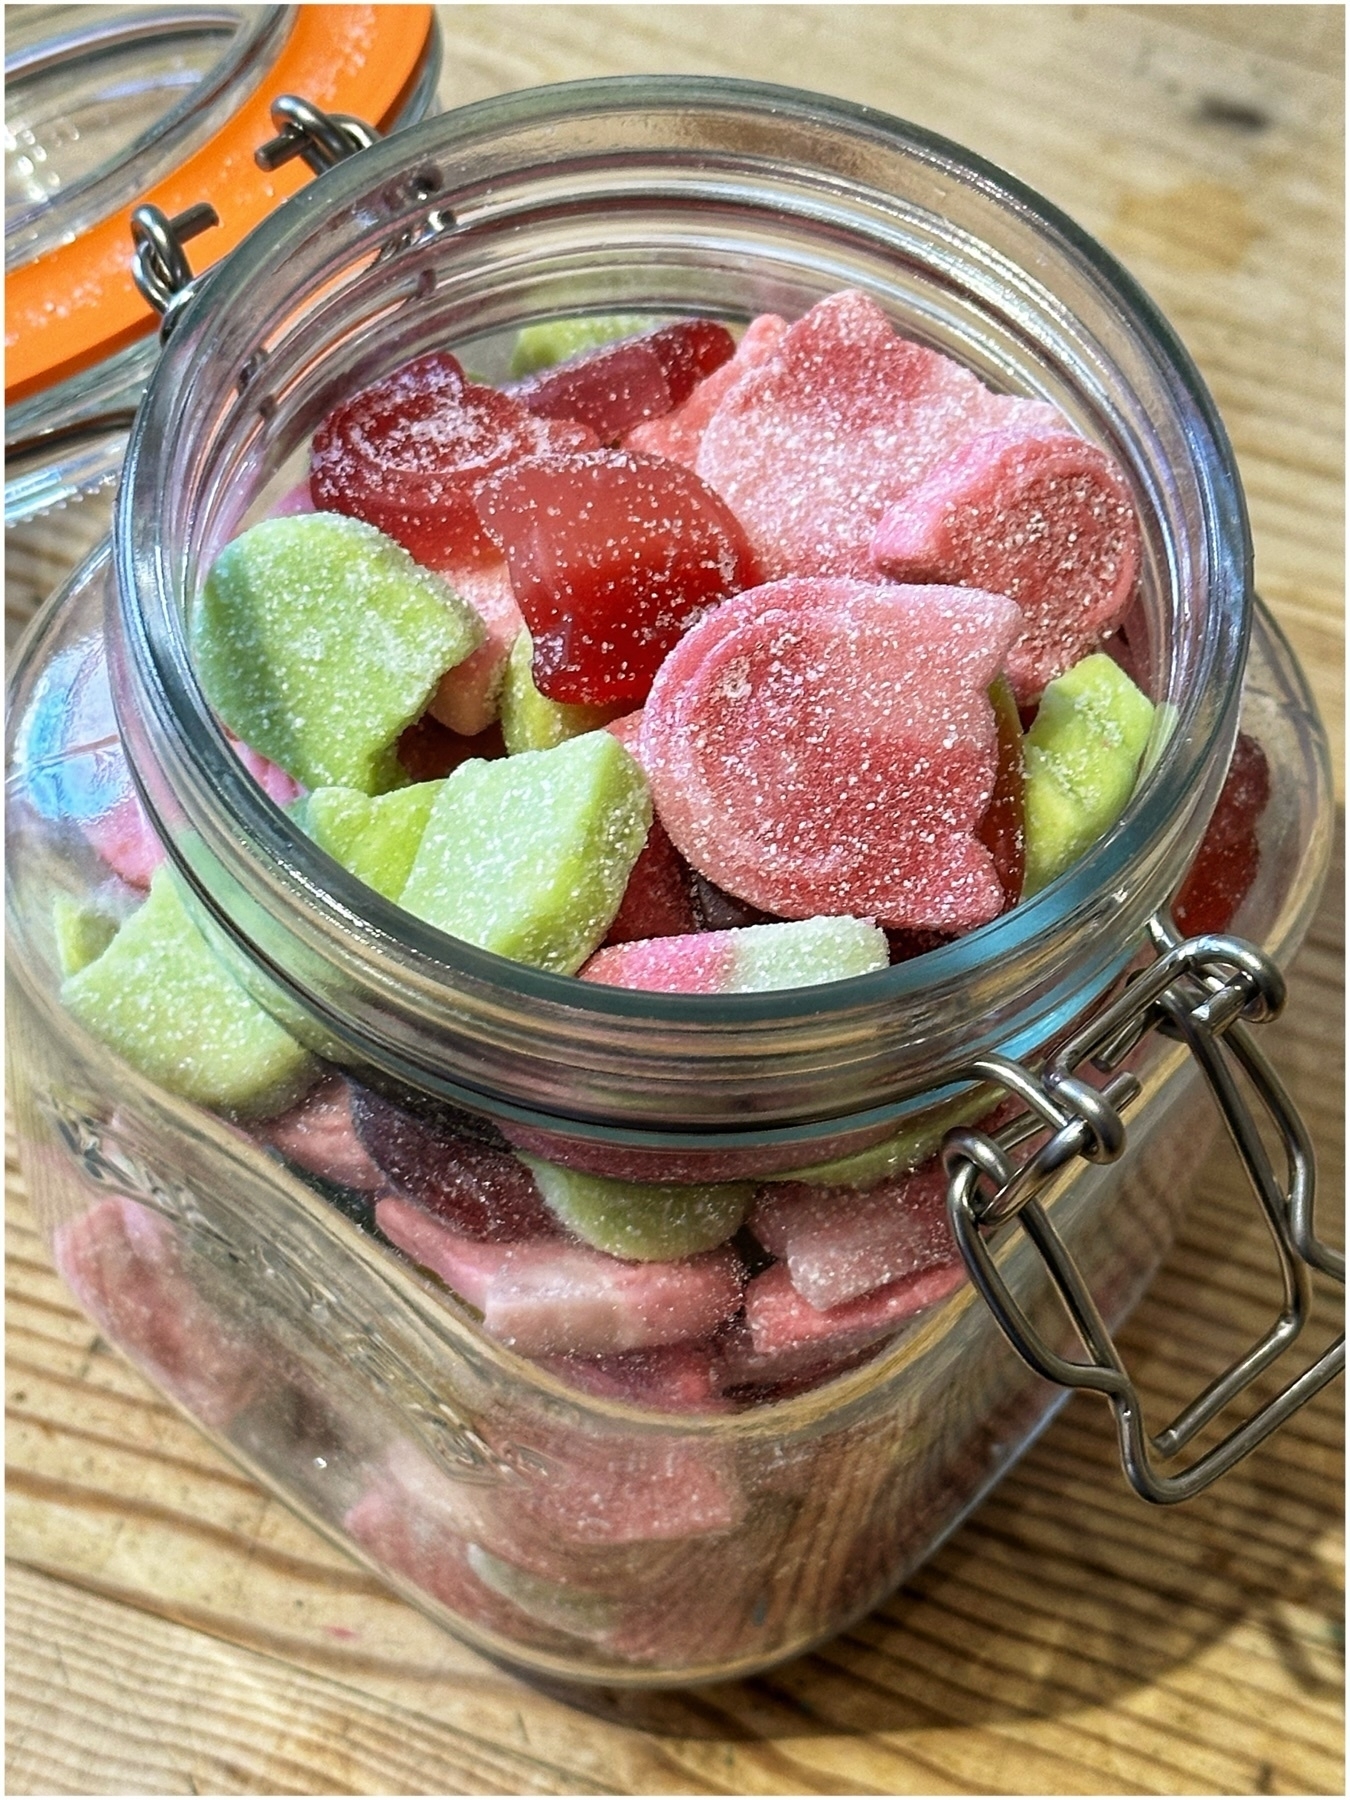 A glass jar filled with various colorful sugar-coated gummy candies on a wooden surface.